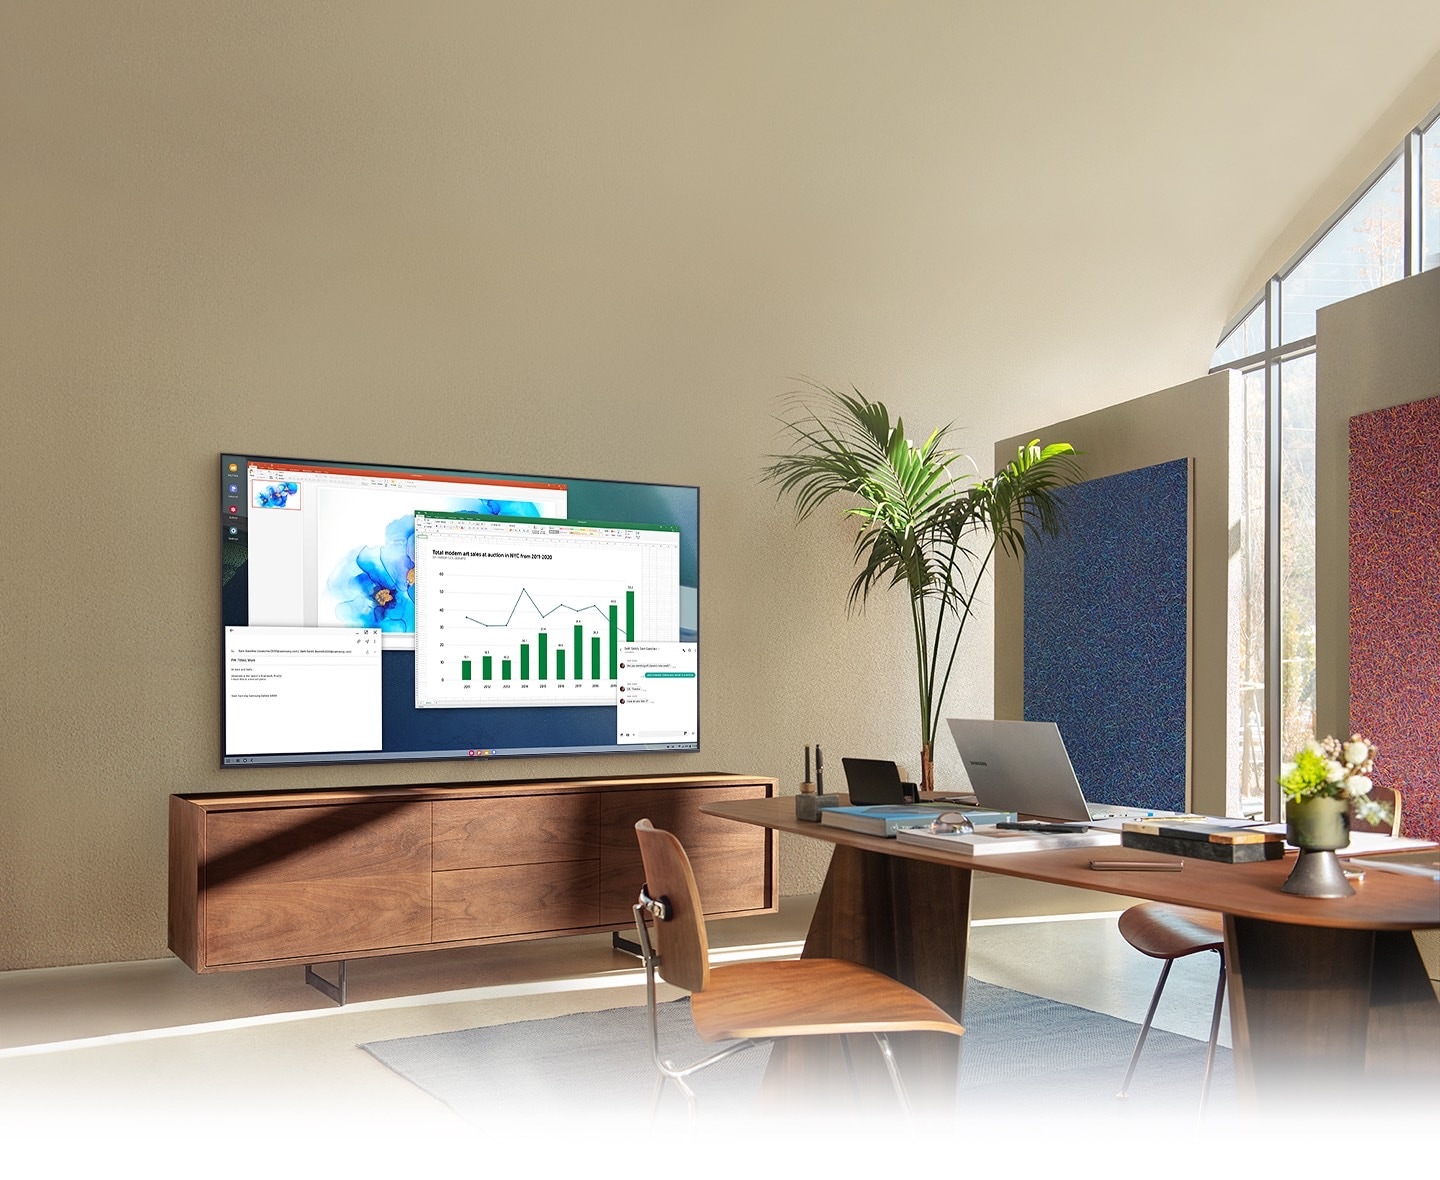 In a living room home office, A TV screen shows PC on TV feature which allows home TV to connect to office PC.